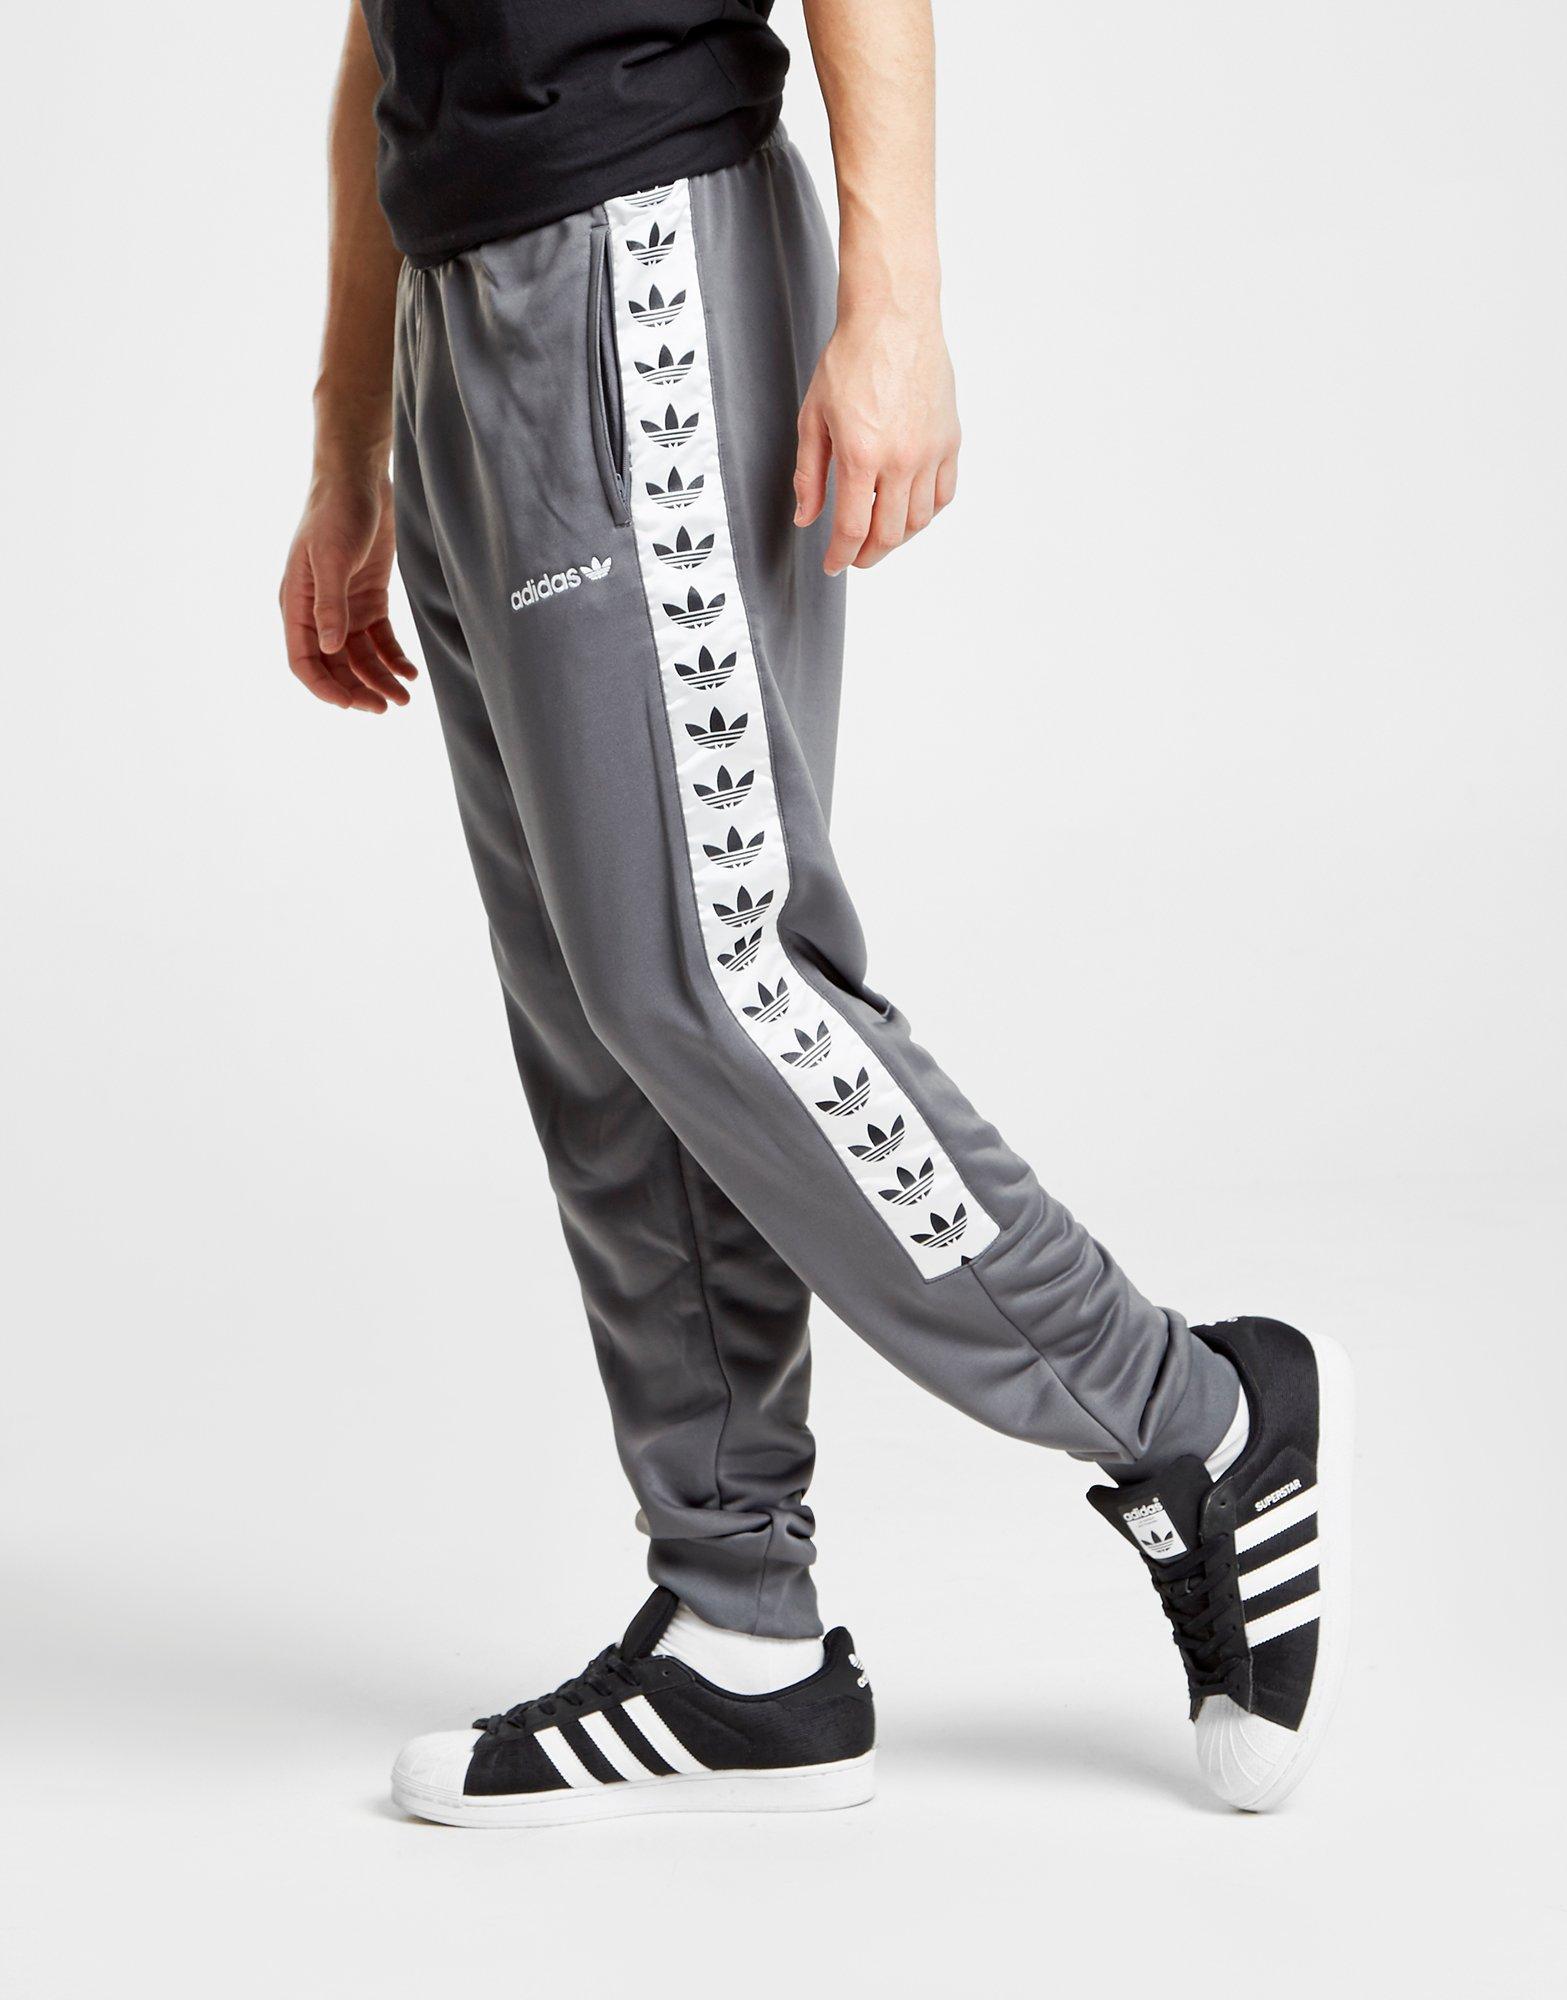 Adidas Tape Poly Pants Clearance, SAVE 45% - aveclumiere.com